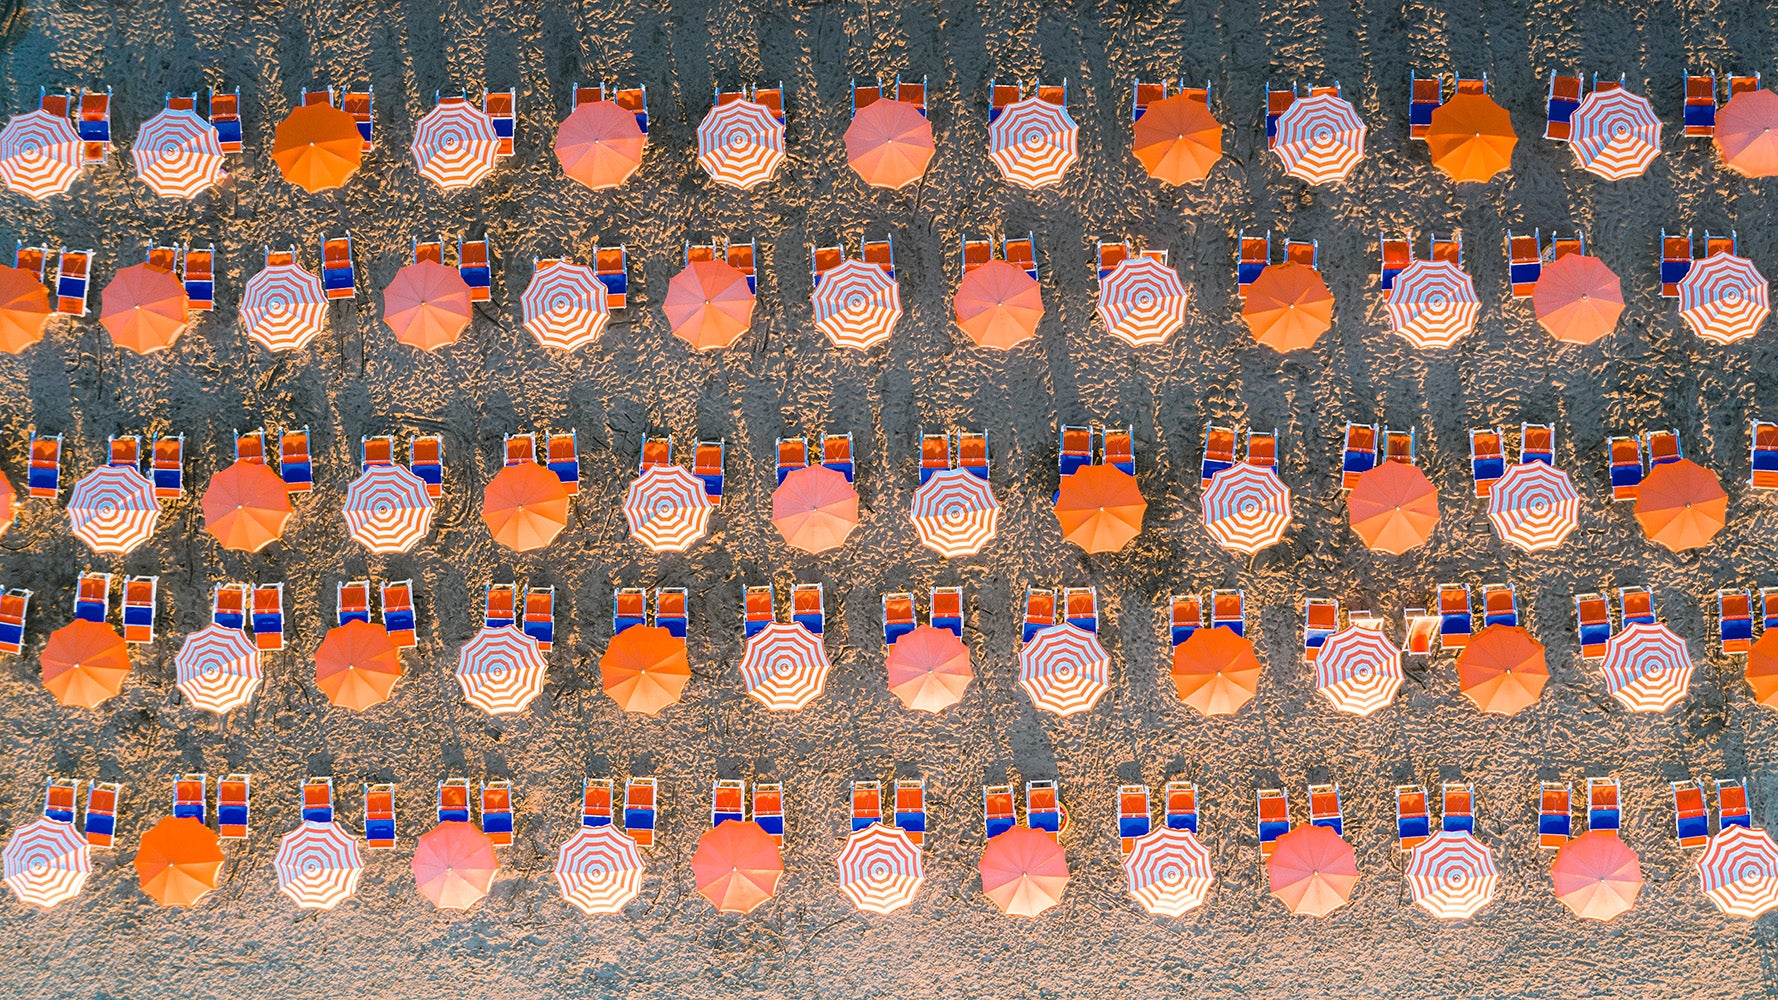 Lot of umbrellas at the beach aerial view